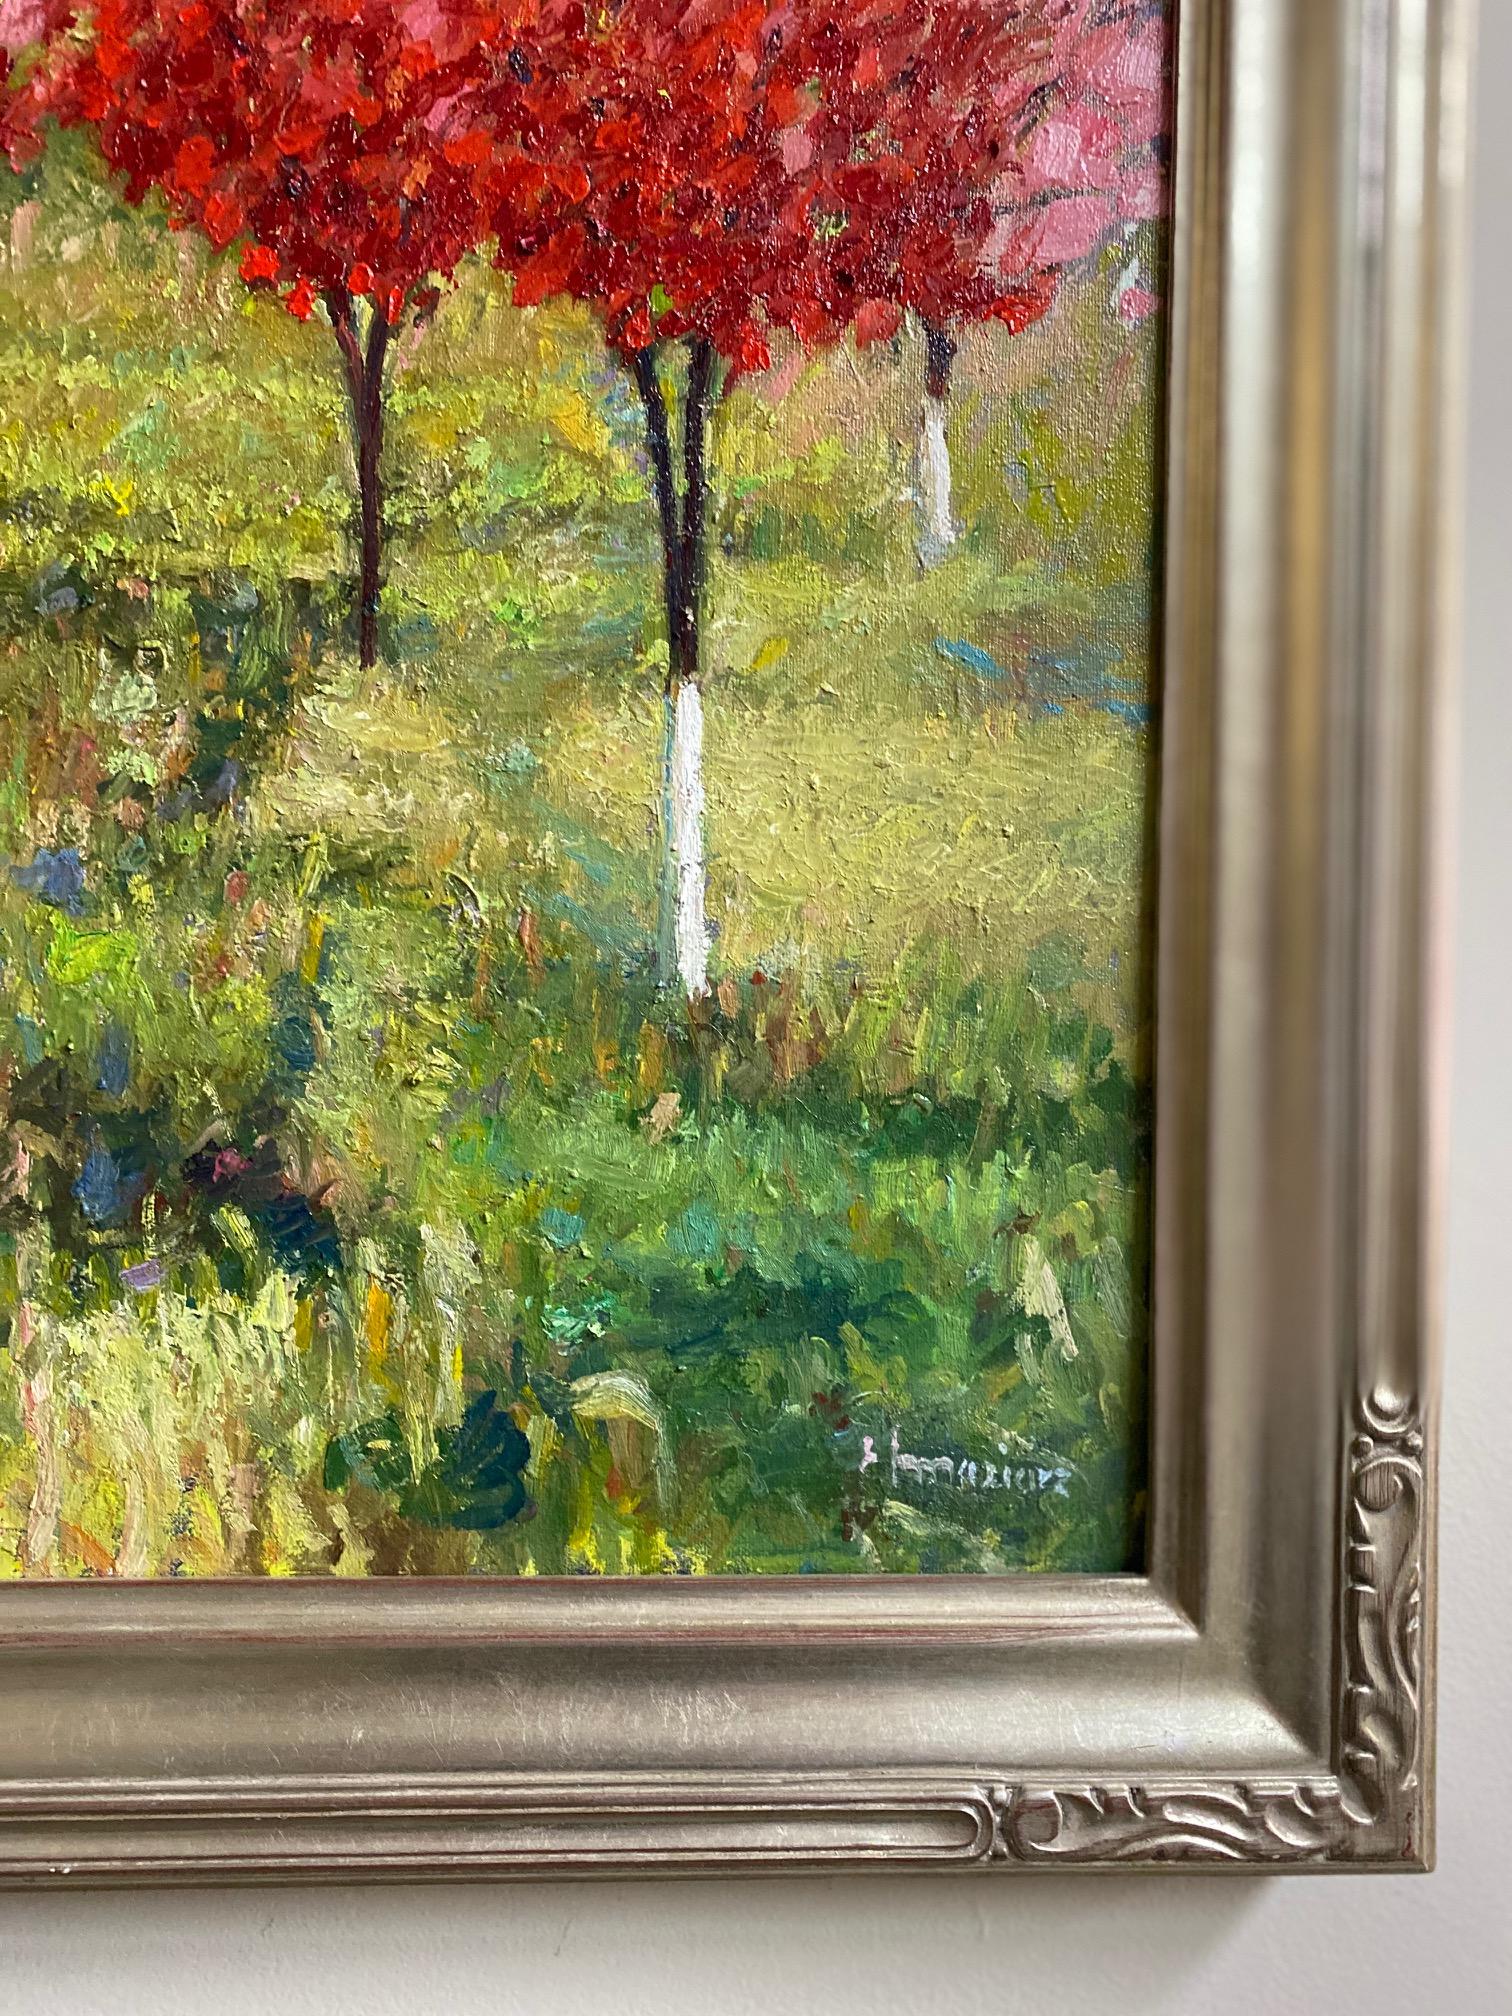 The parade of red flowering trees feel like an antique red velvet with their plush red flowers and mixture of red color values. Their shapes add to the sumptuous feeling they lend to the entire expressionist landscape.  Polish American artist Eugene